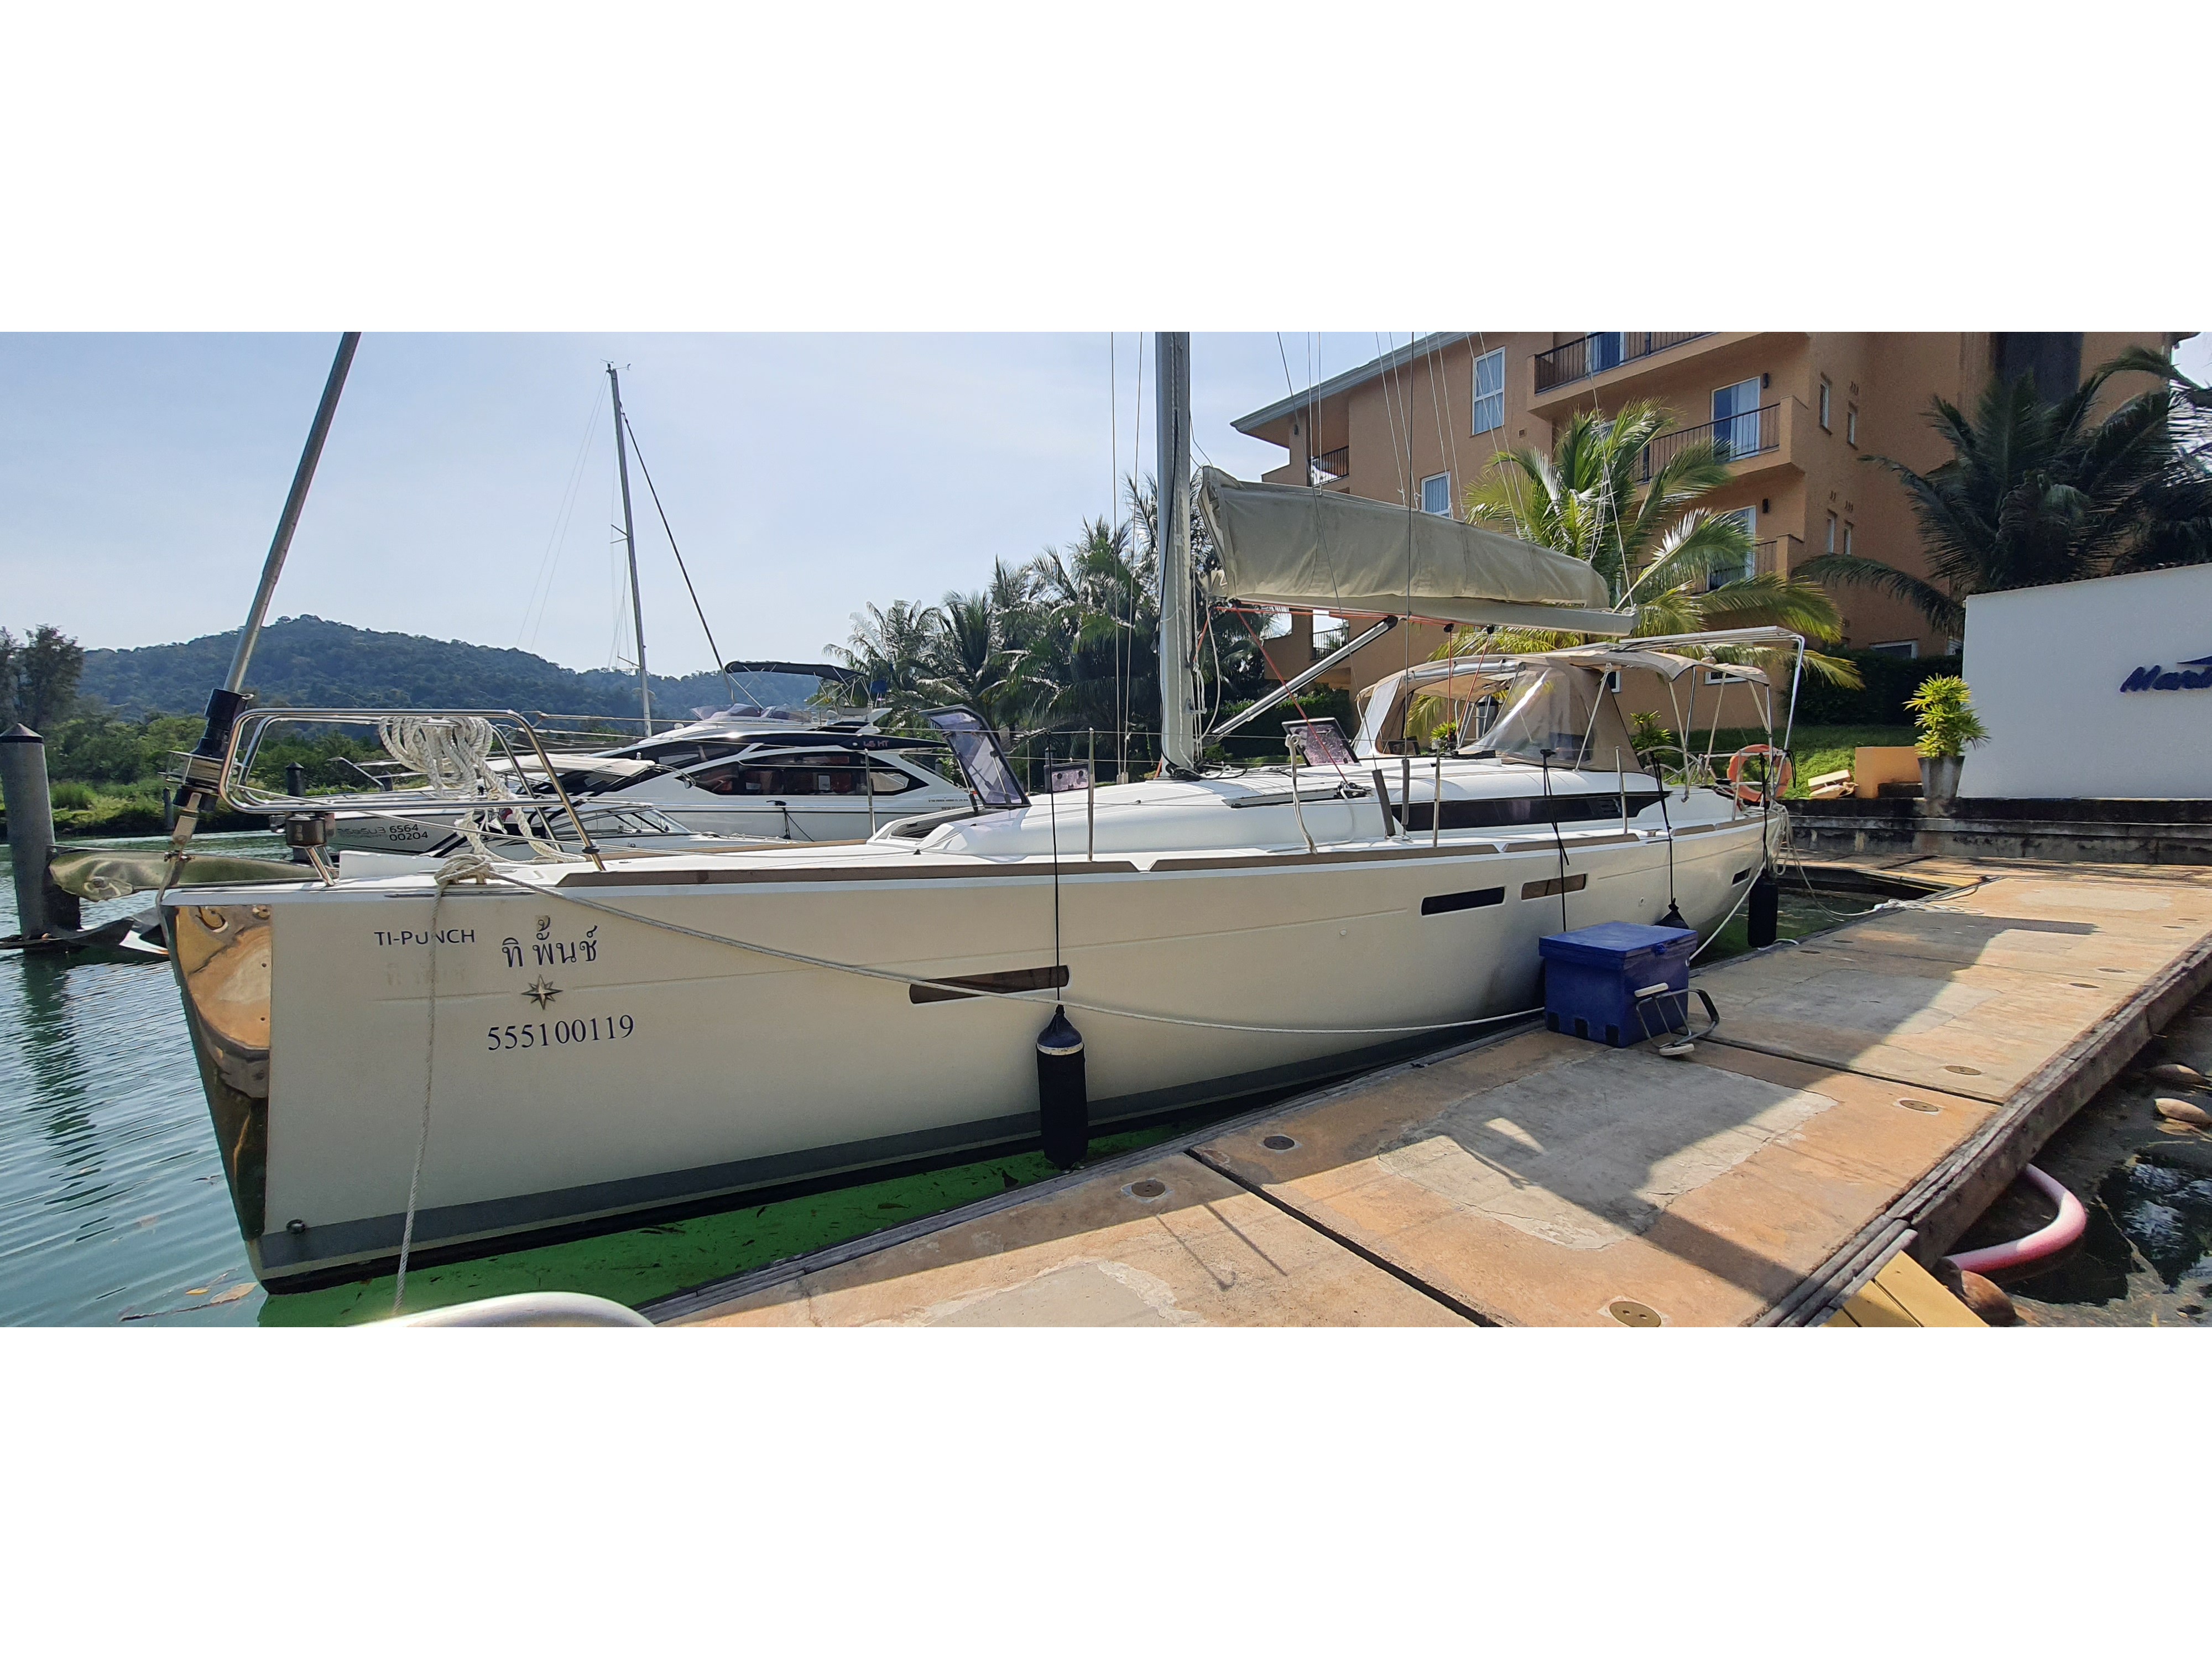 Sun Odyssey 409 - Yacht Charter Koh Chang & Boat hire in Thailand Koh Chang Ao Salak Phet 3